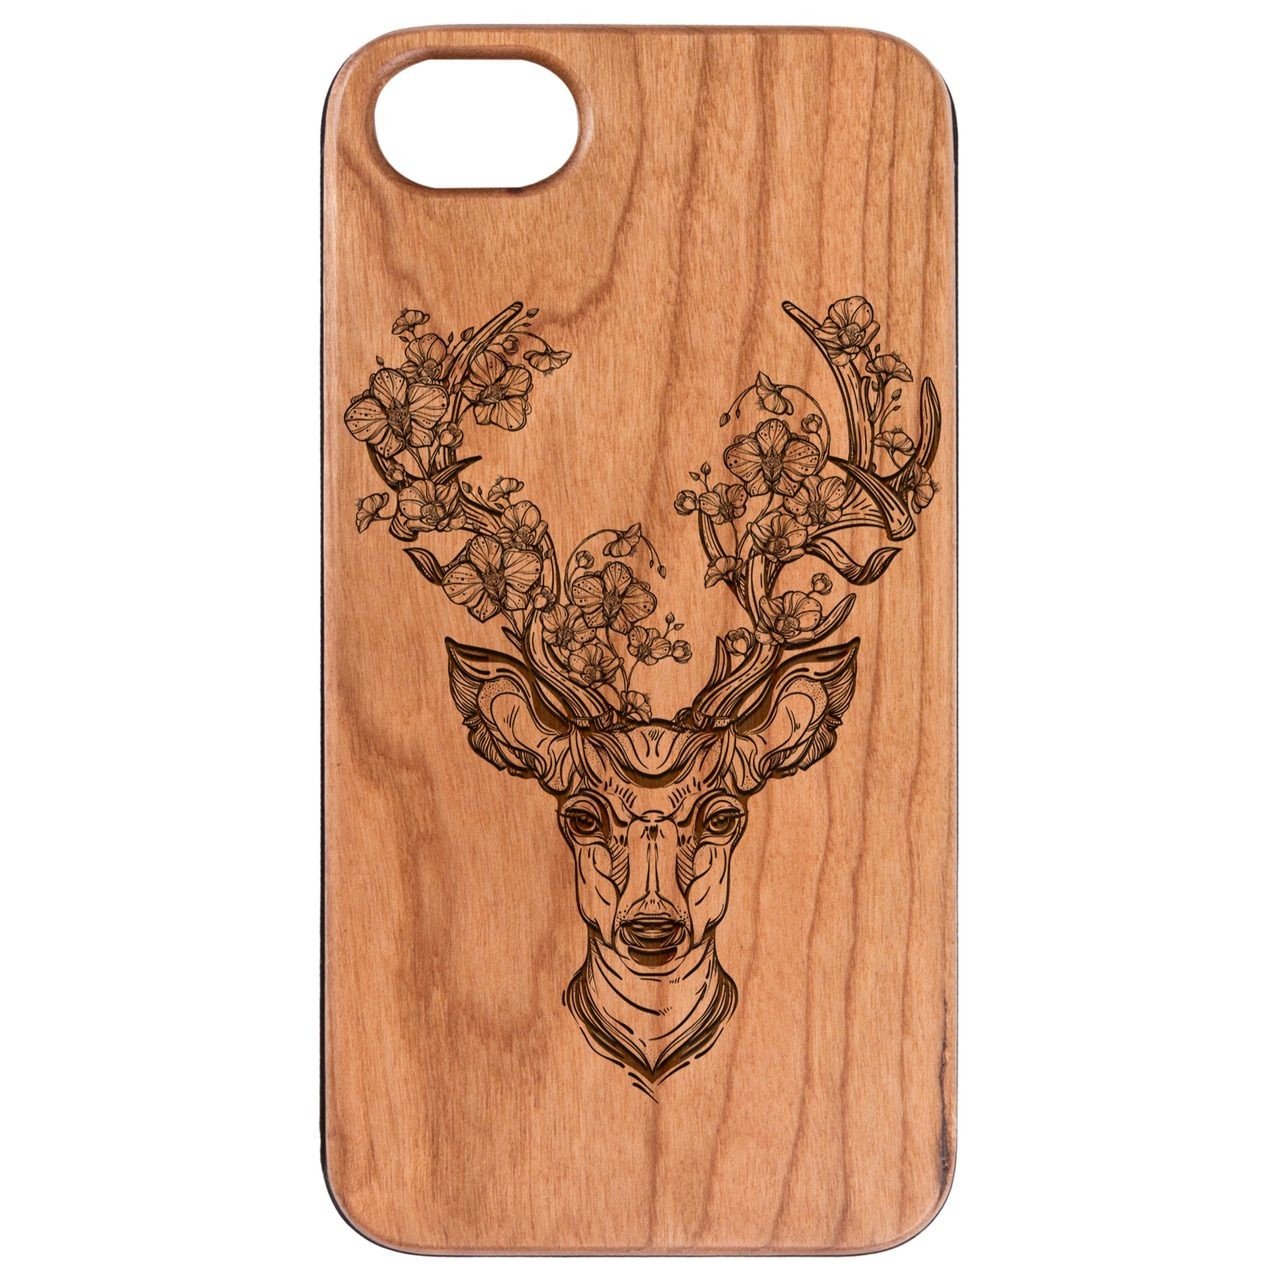 Deer with Flowers - Engraved - Wooden Phone Case